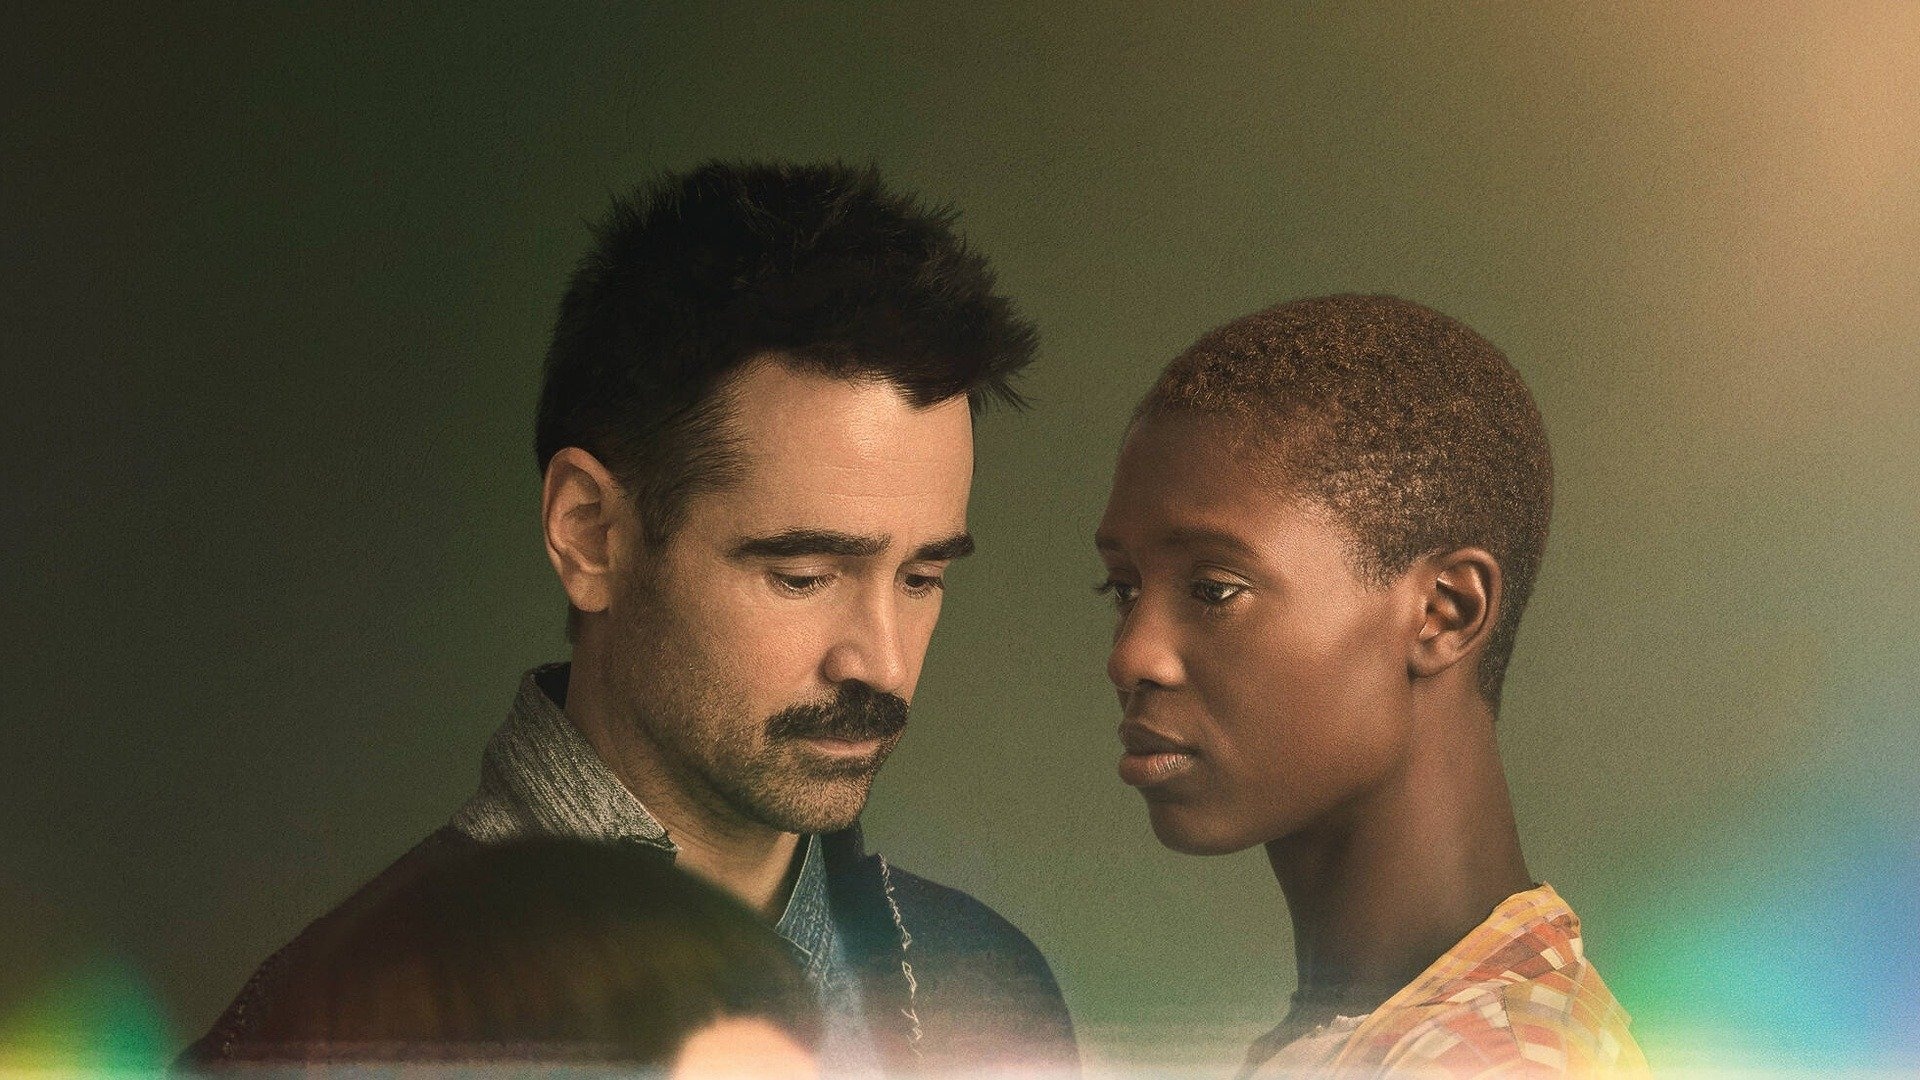 After Yang: Colin Farrell and Jodie Turner-Smith portrayed Jake and Kyra. 1920x1080 Full HD Wallpaper.